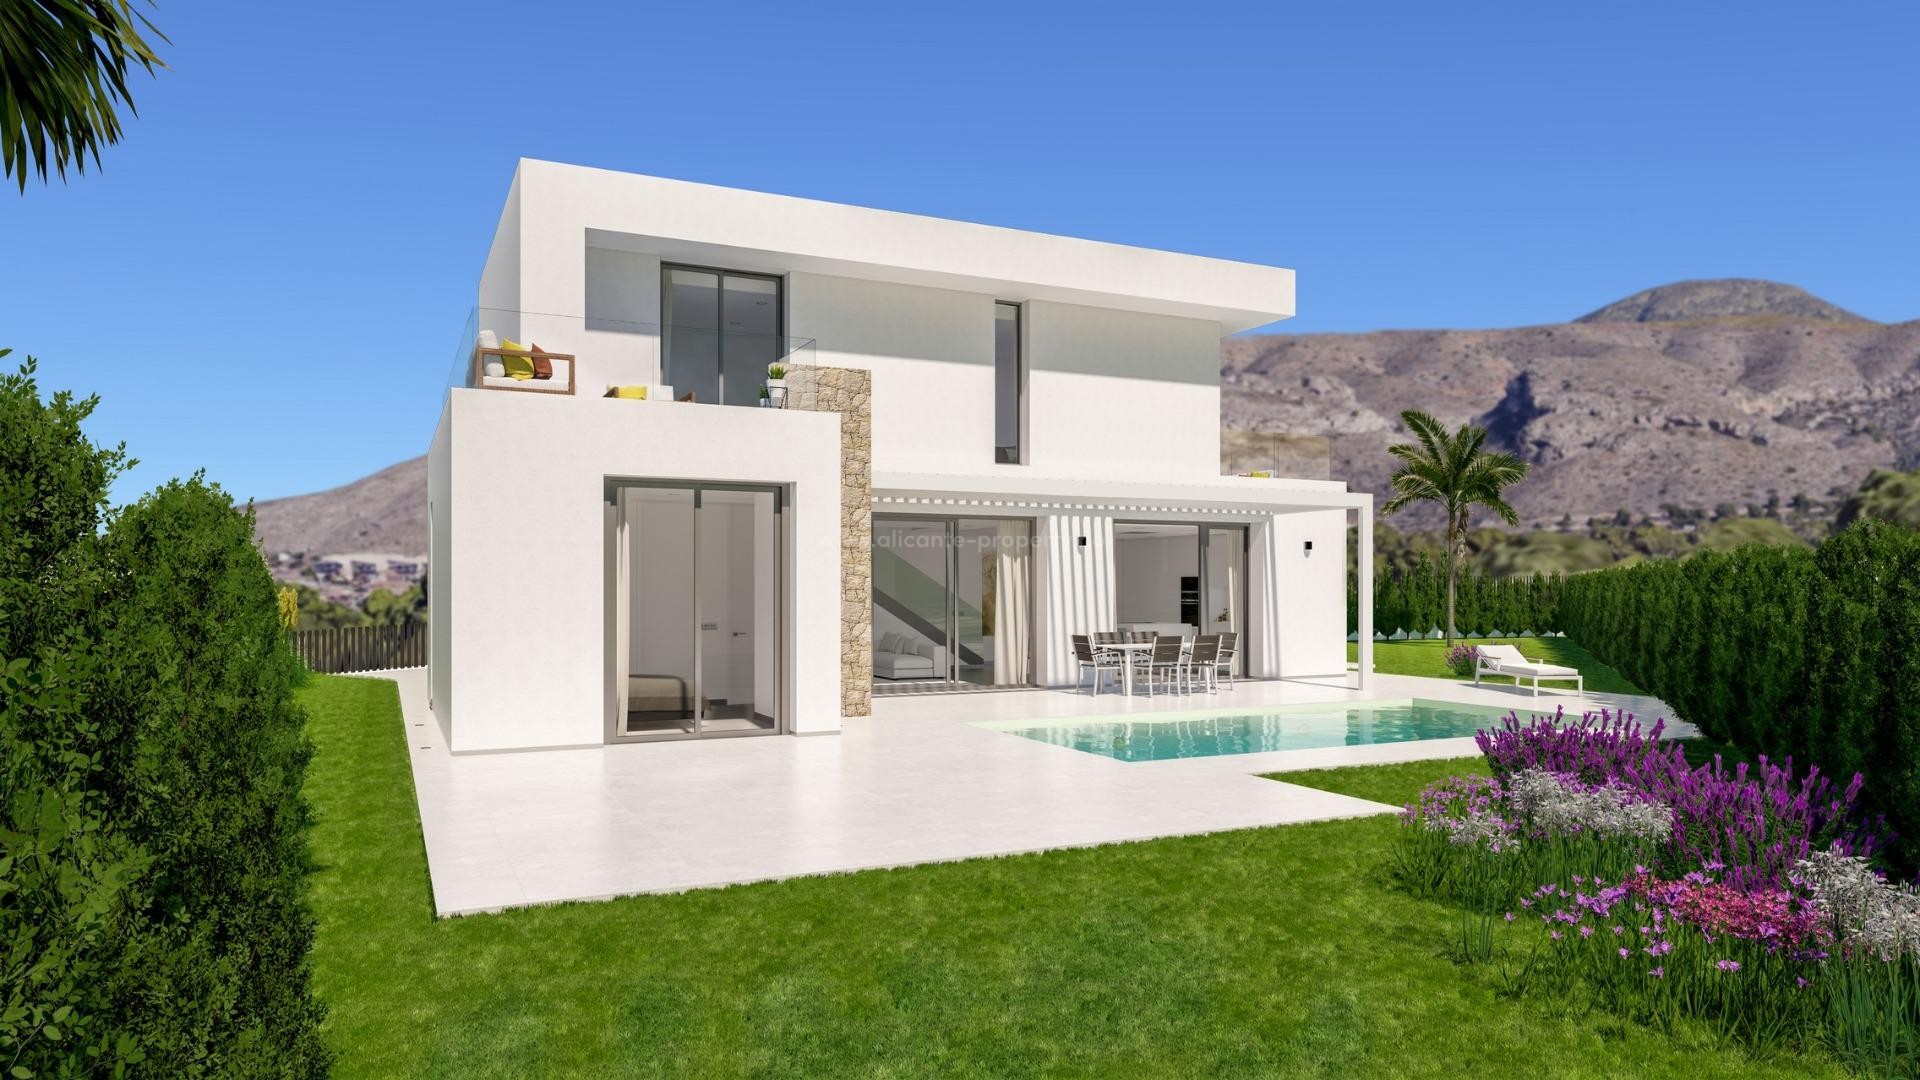 Finestrat with new villas/houses with sea views in Sierra Cortina, 3 bedrooms, 3 bathrooms, terrace with fantastic views of Benidorm, private garden with pool